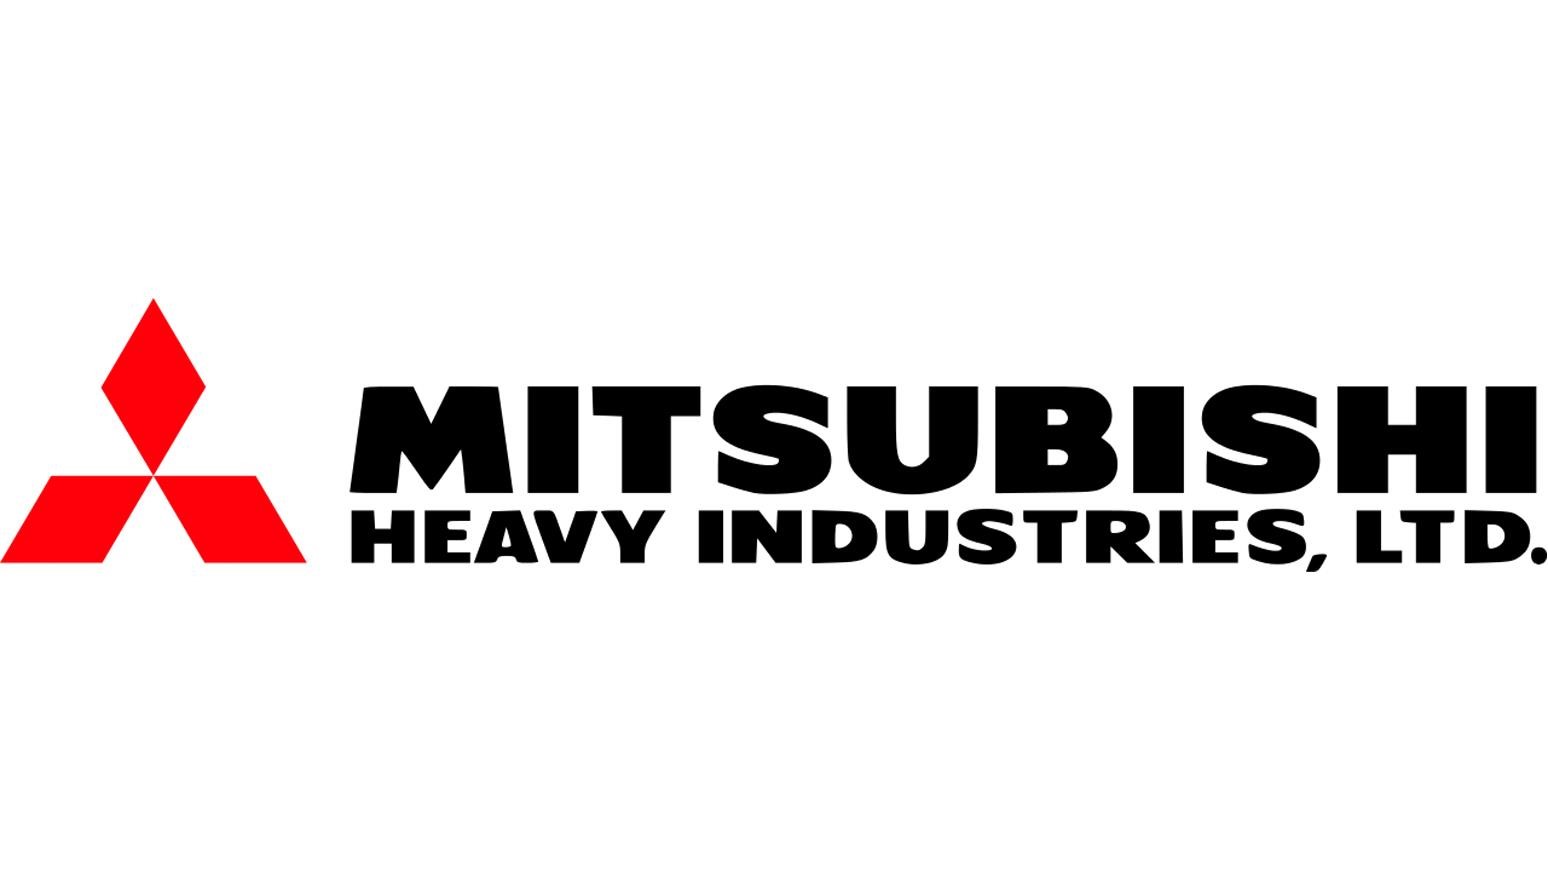 MITSUBISHI Aircraft For Sale in KRUM, TEXAS 3 Listings